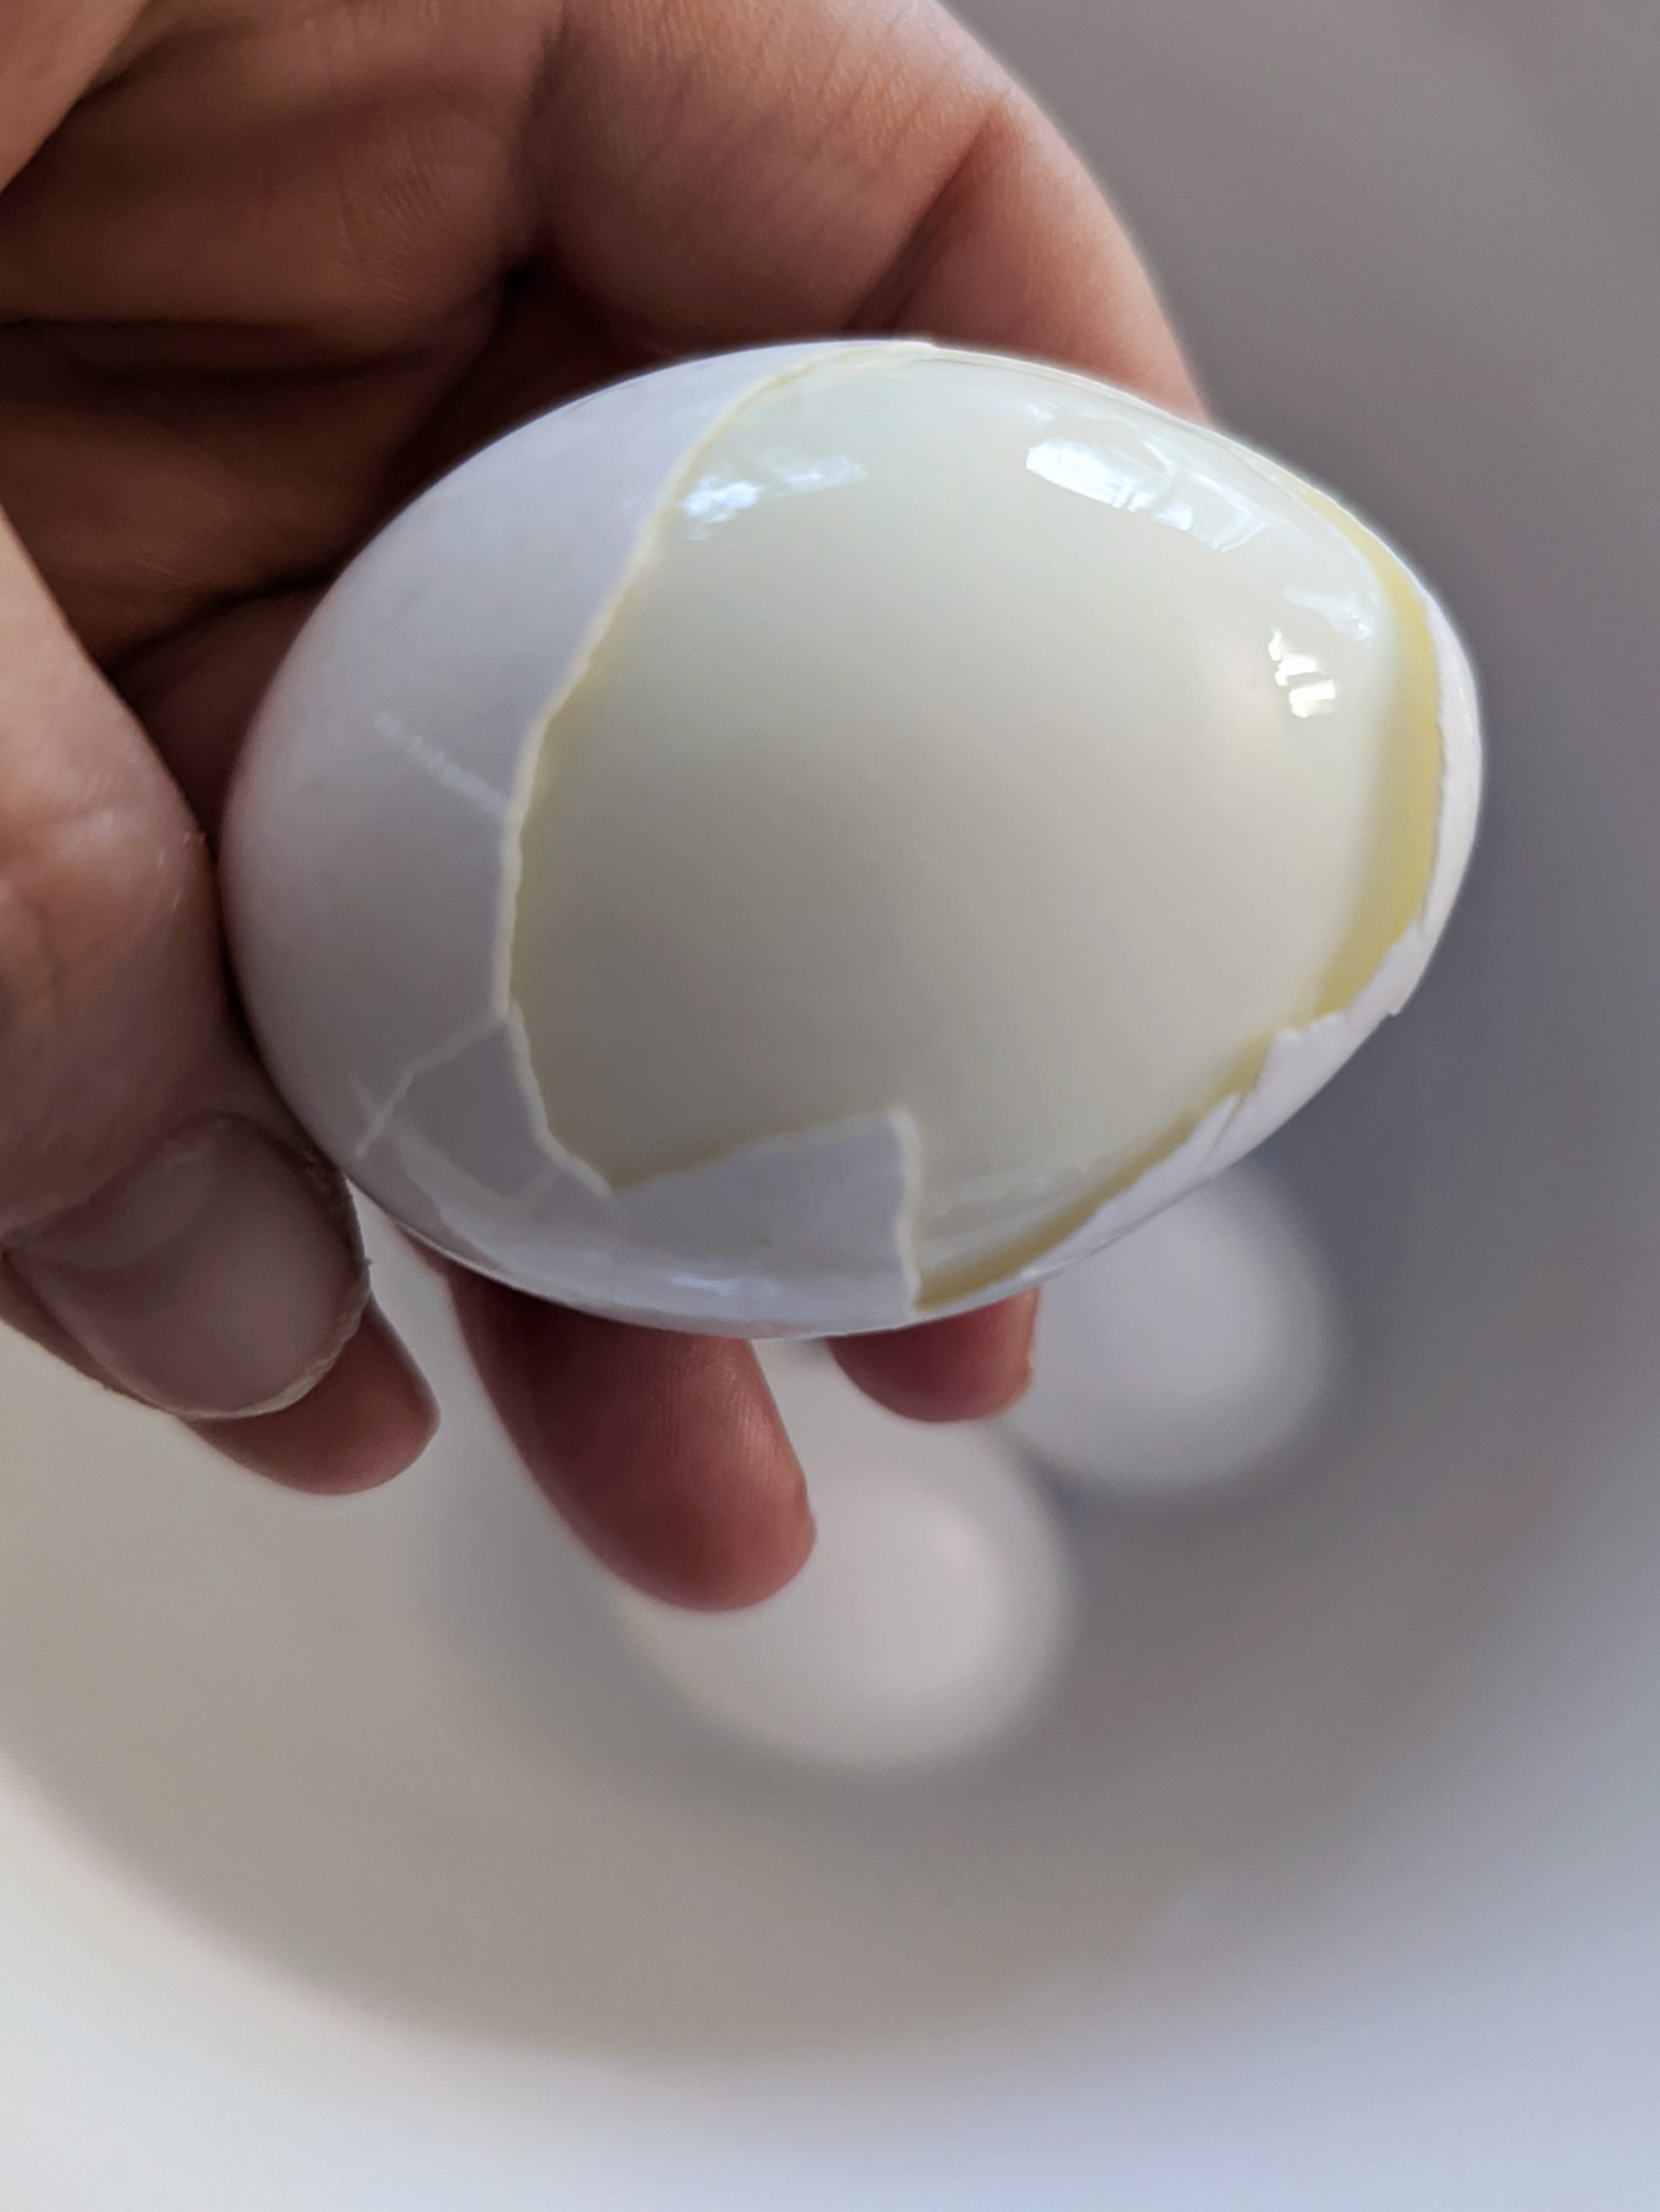 A hand holding a cracked hard boiled egg.